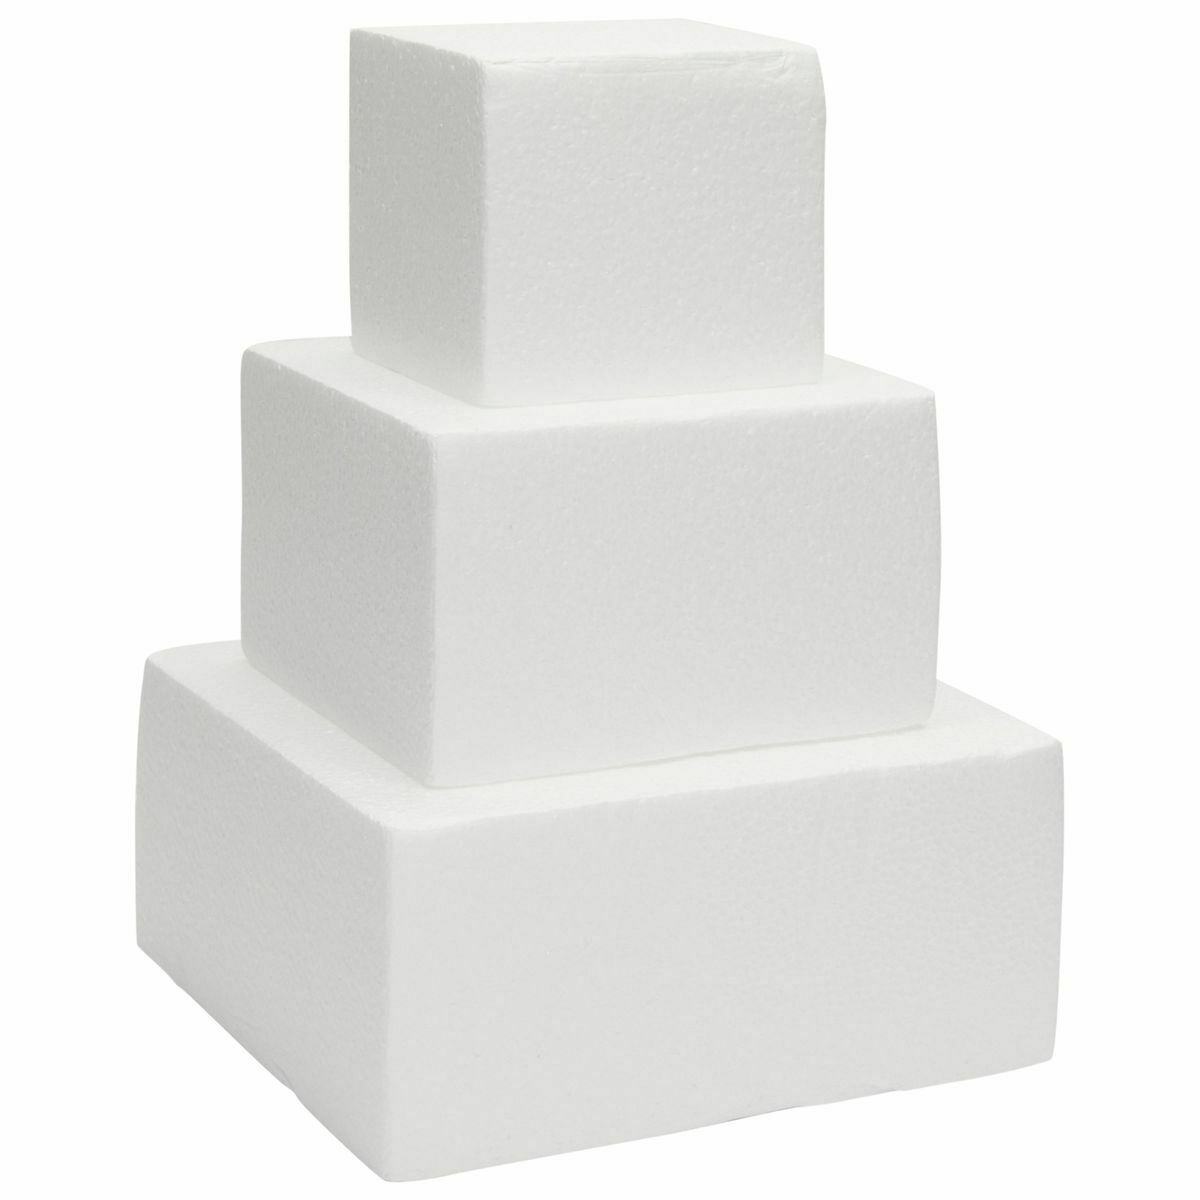 Small Square Foam Cake Dummy For Decorating And Wedding Display, 3 Tiers